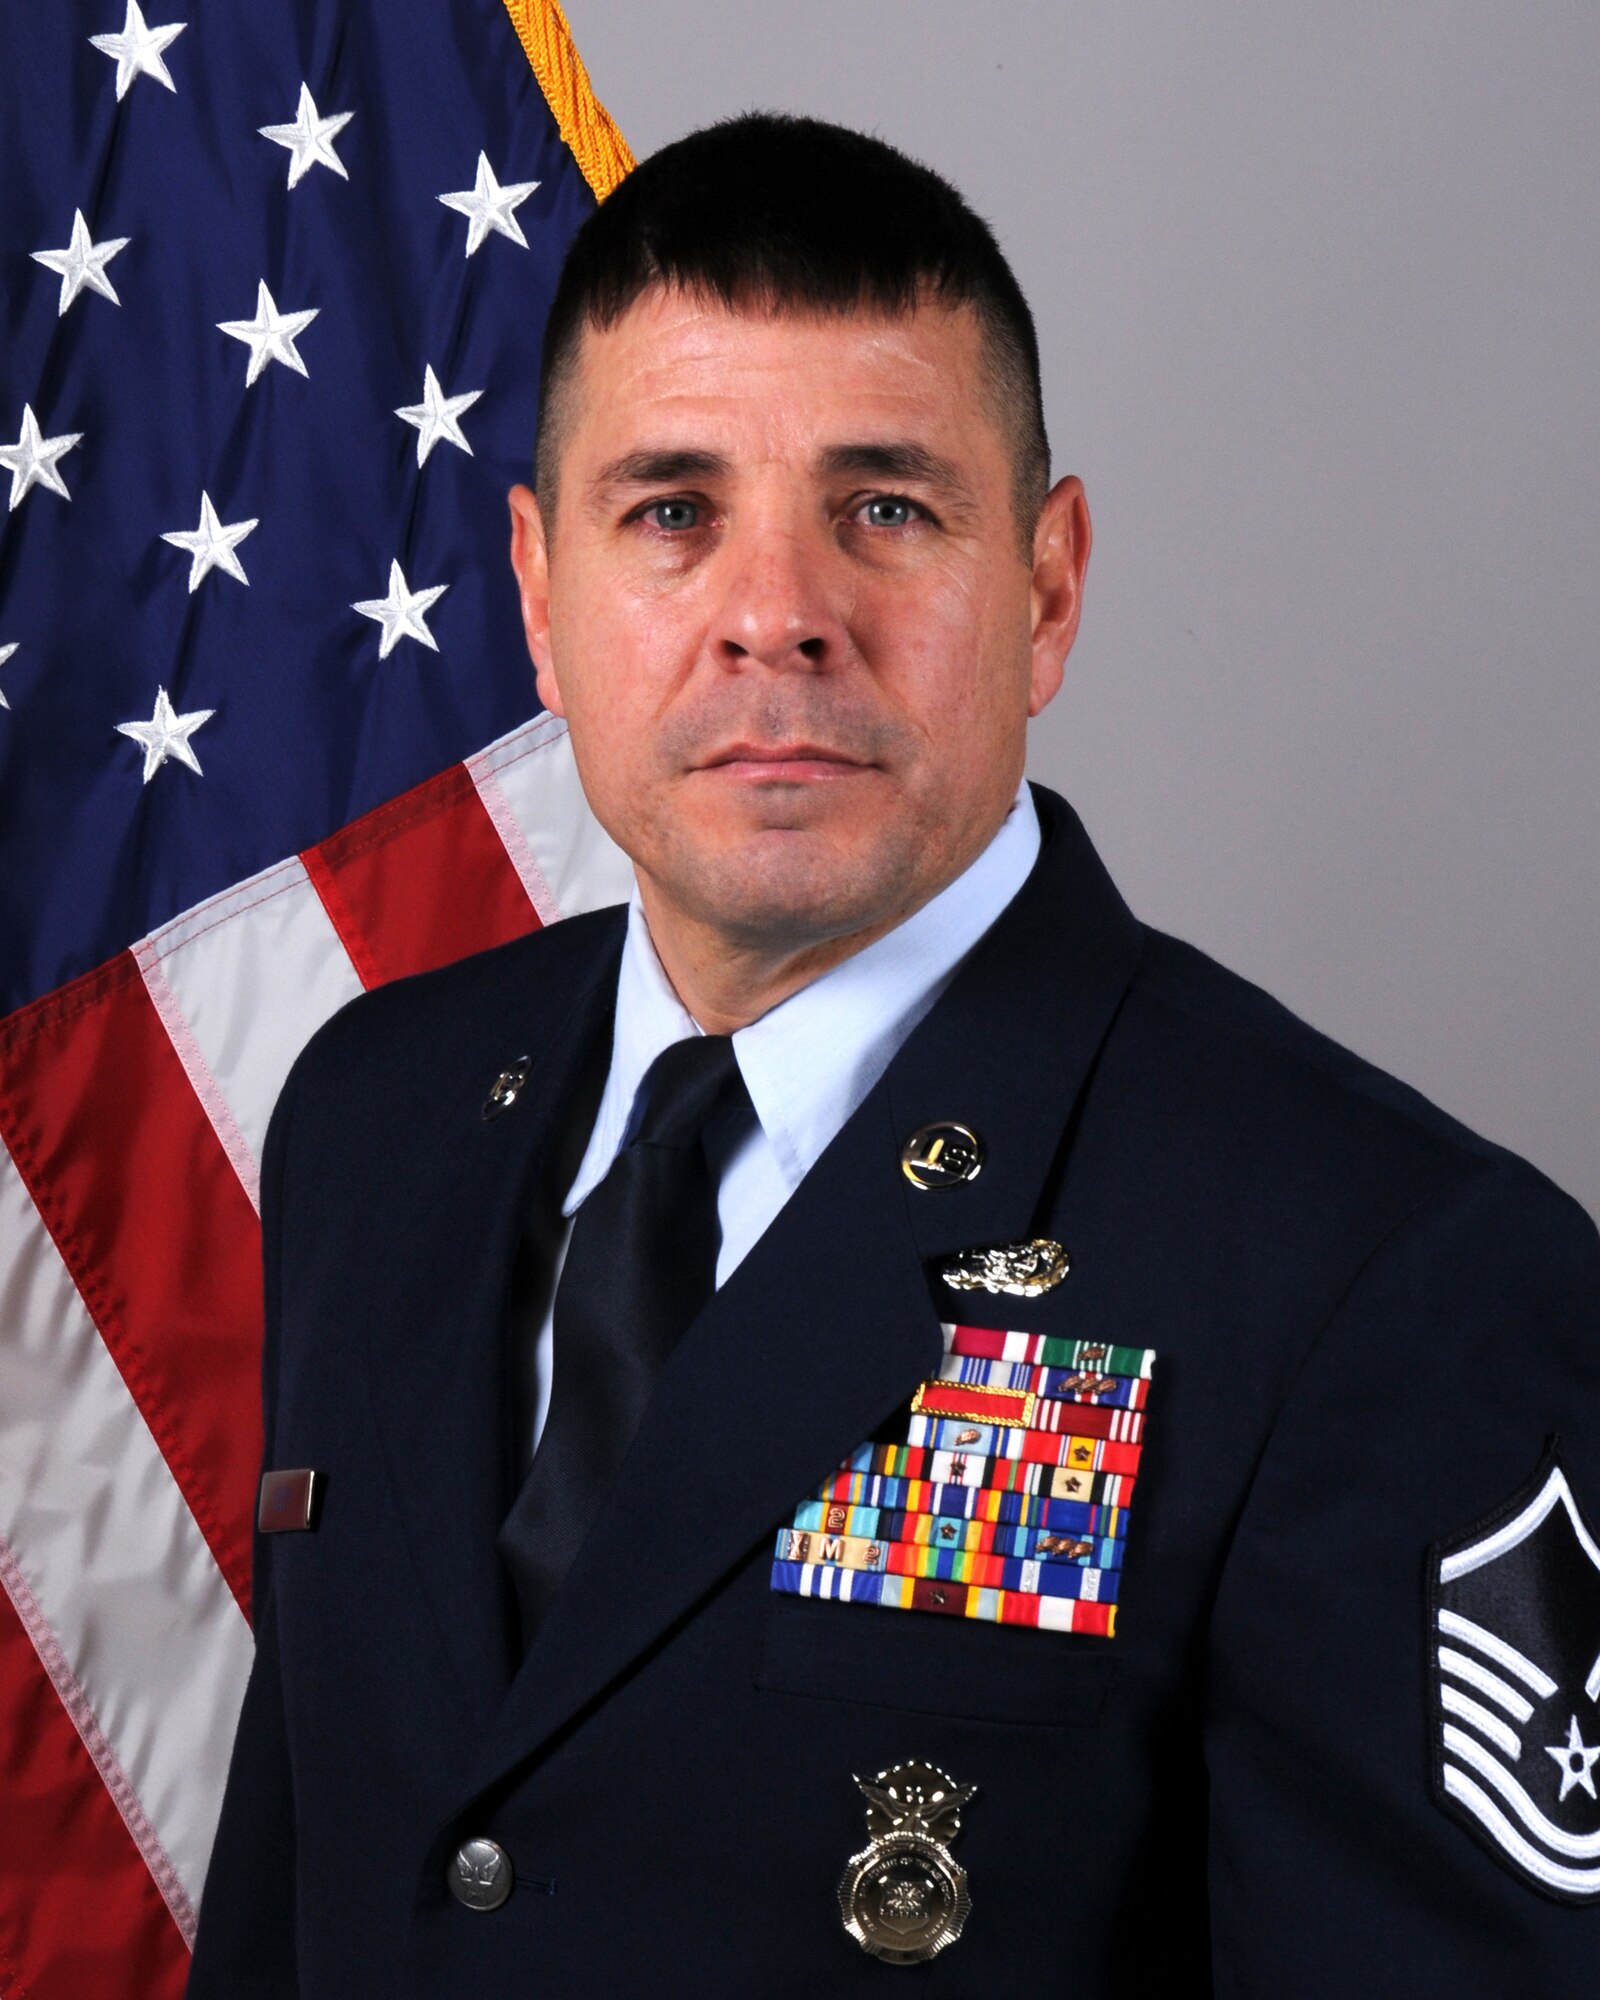 Master Sgt. Kurt Lilley, of the 219th Security Forces Squadron, is the North Dakota Air National Guard senior noncommissioned officer of the year for 2017.